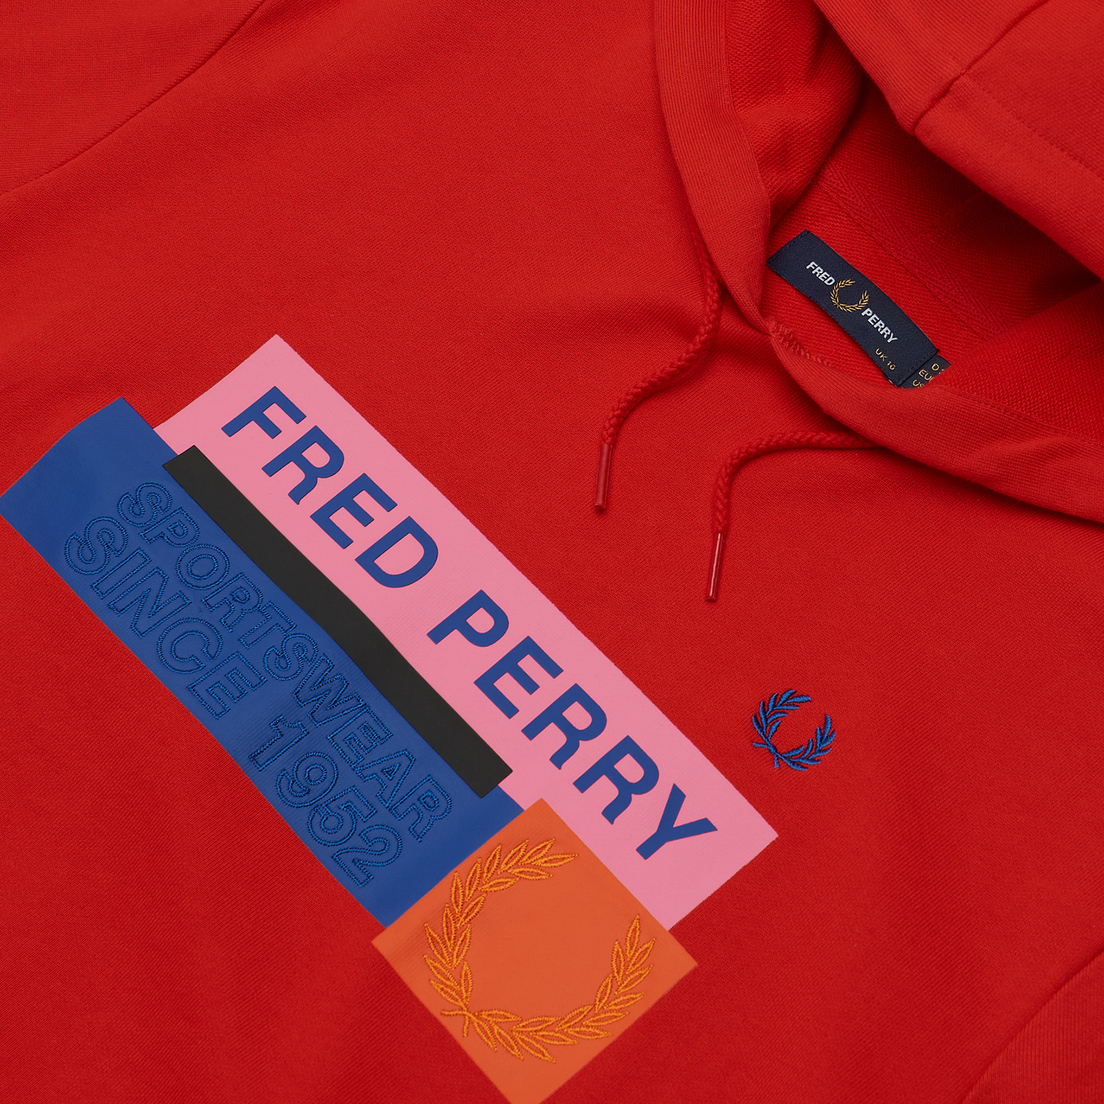 Fred Perry Женская толстовка Colour Block Graphic Print Hoodie